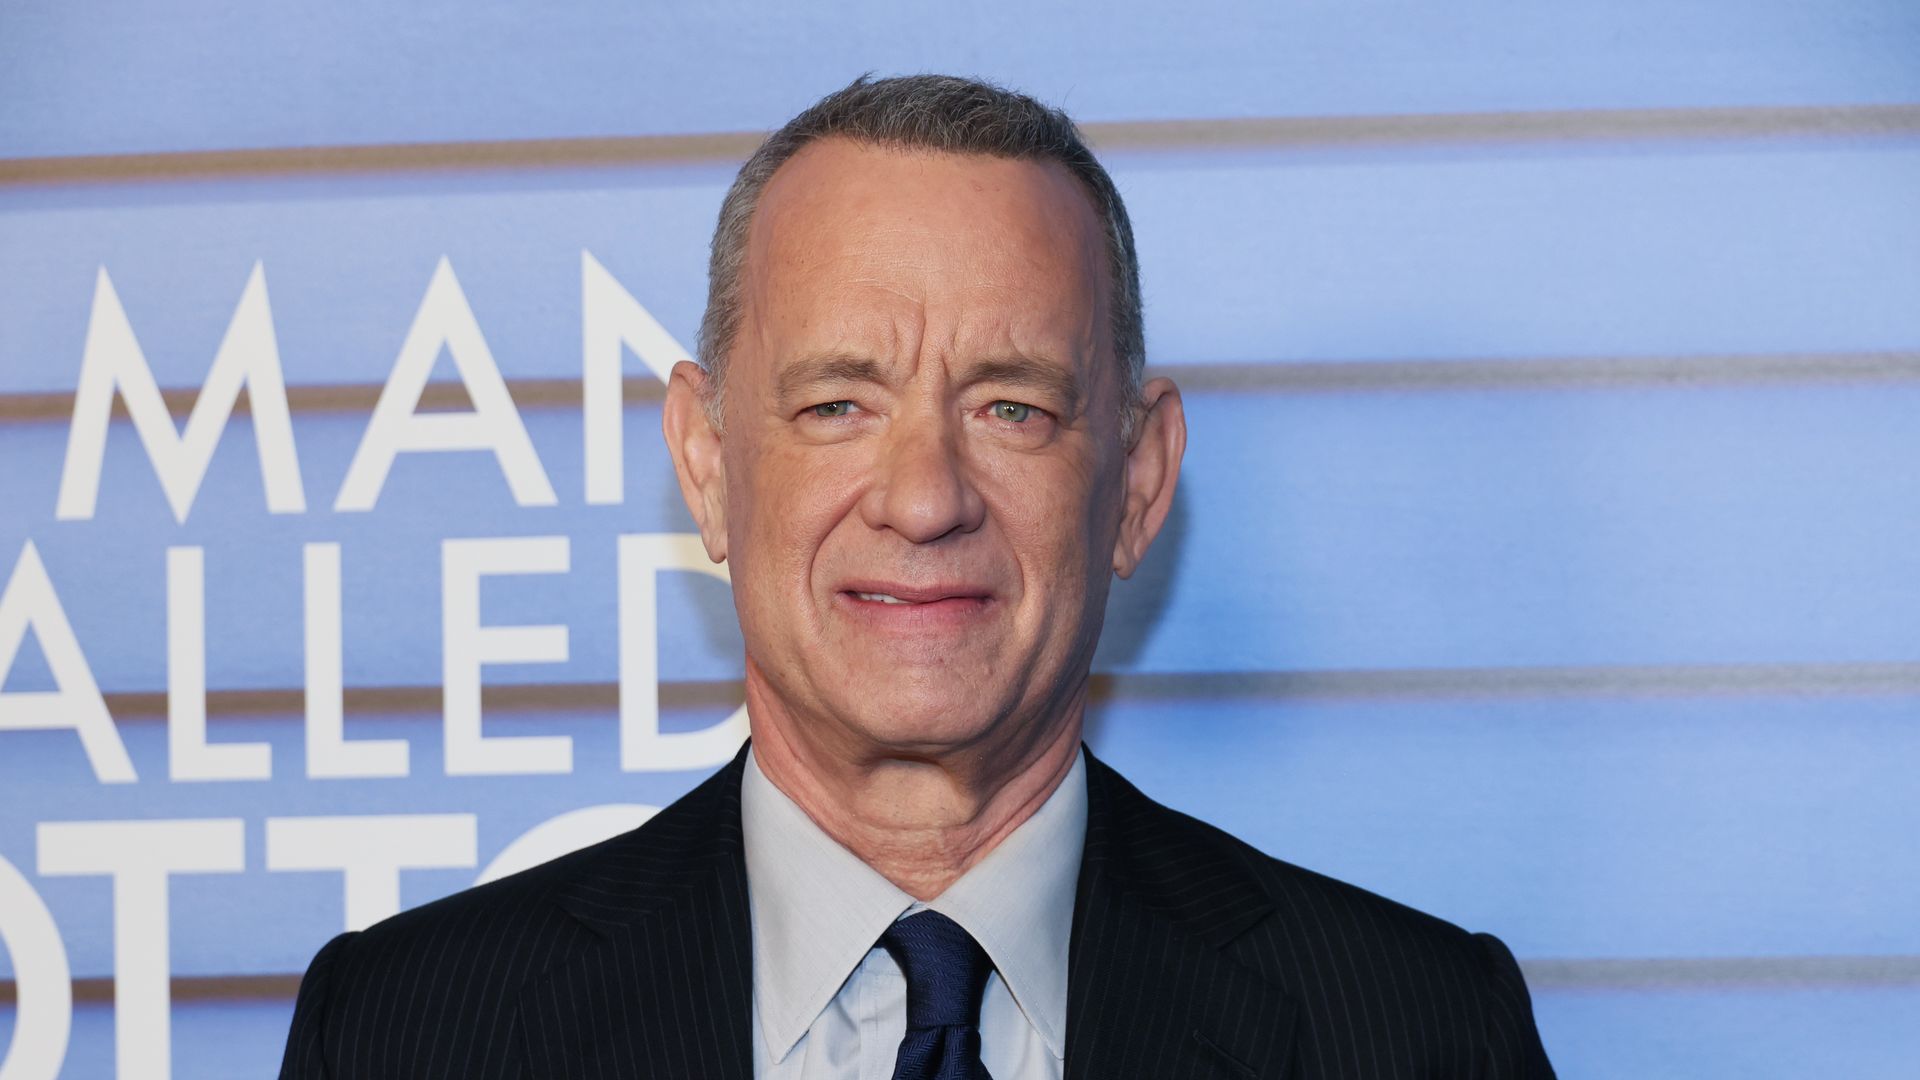 Tom Hanks attends the "A Man Called Otto" New York Screening